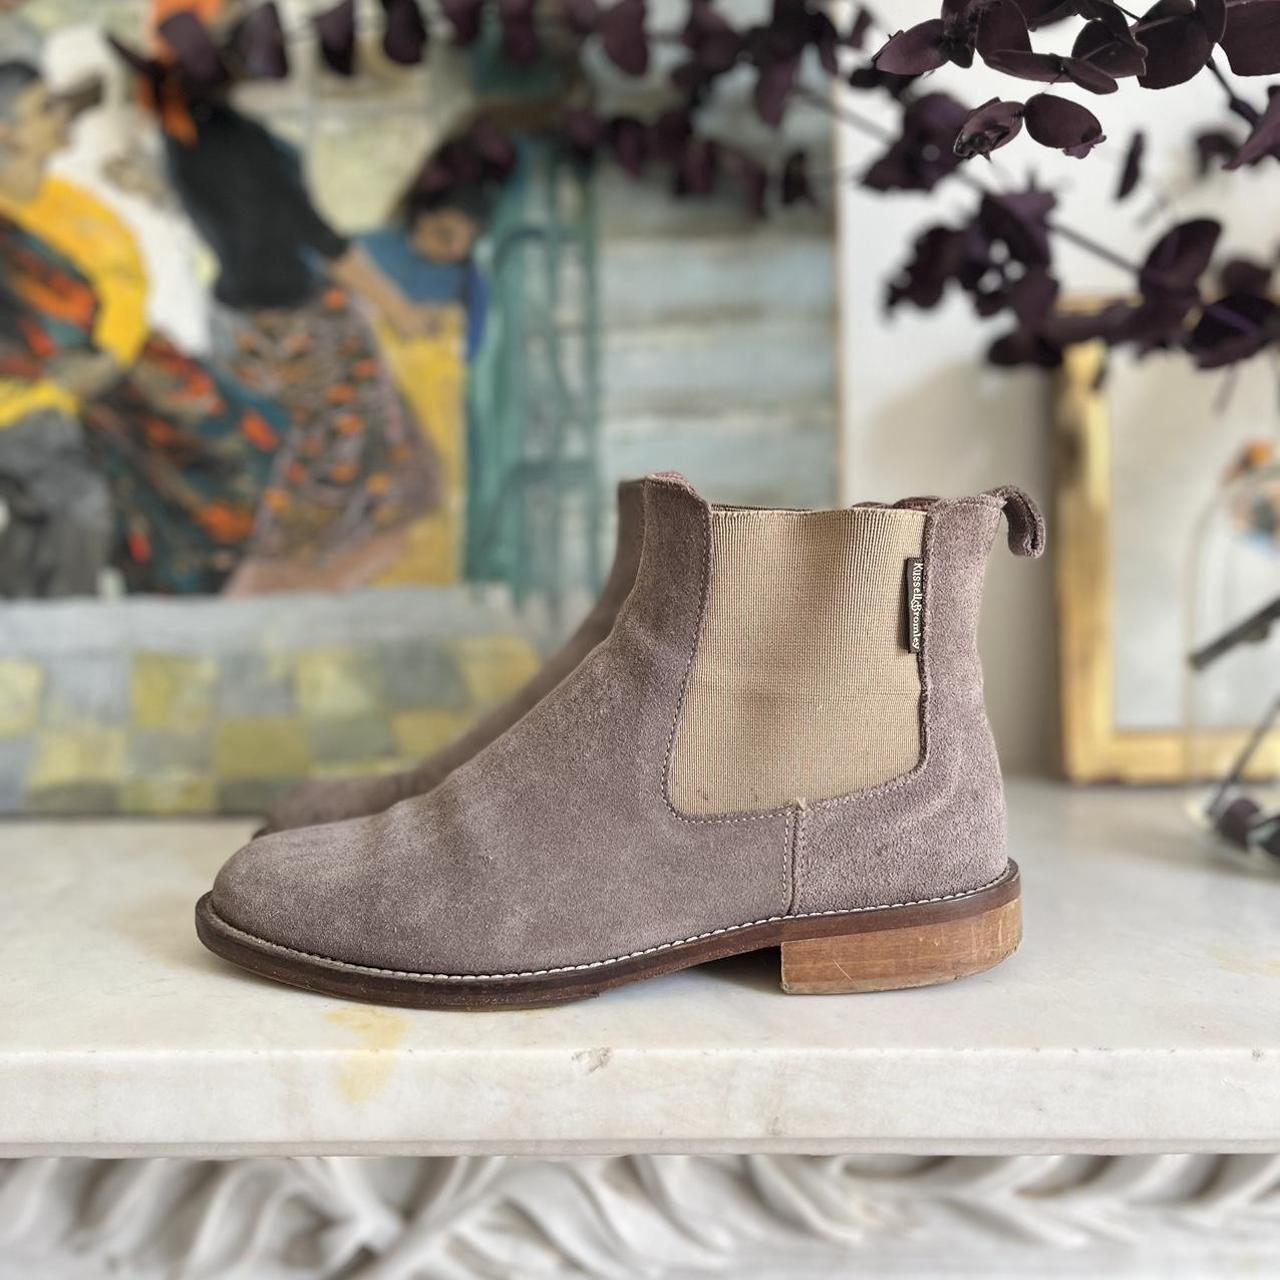 Suede Russel & Bromley Chelsea boots Chic spring /... - Depop